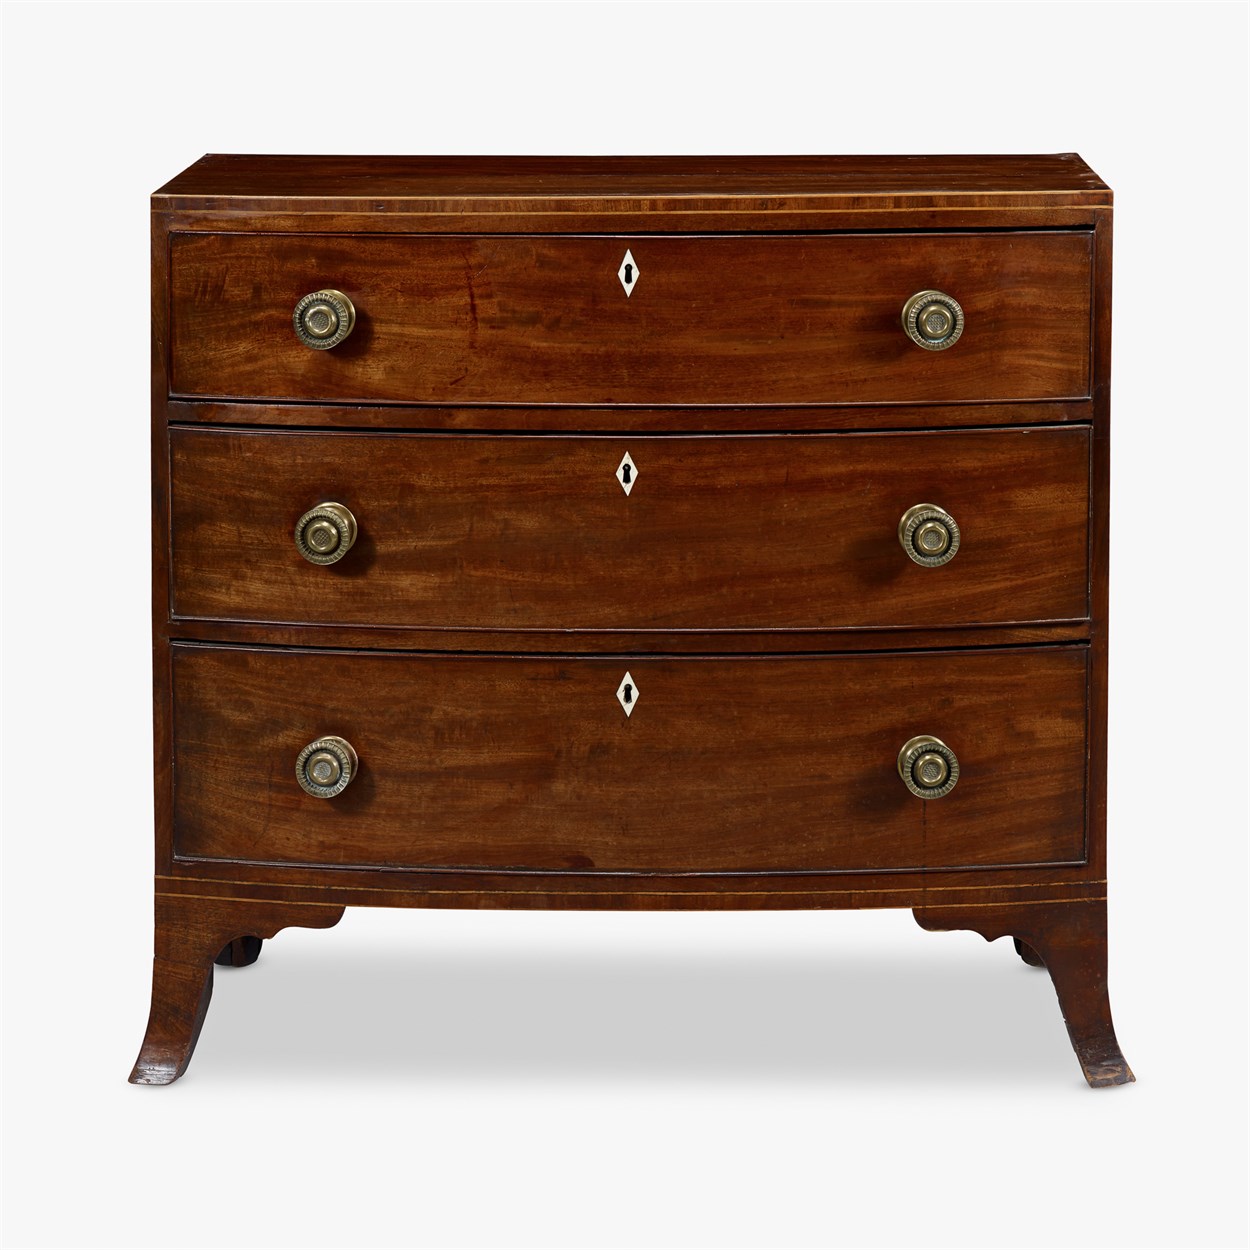 Lot 33 - Federal inlaid mahogany bowfront chest of drawers